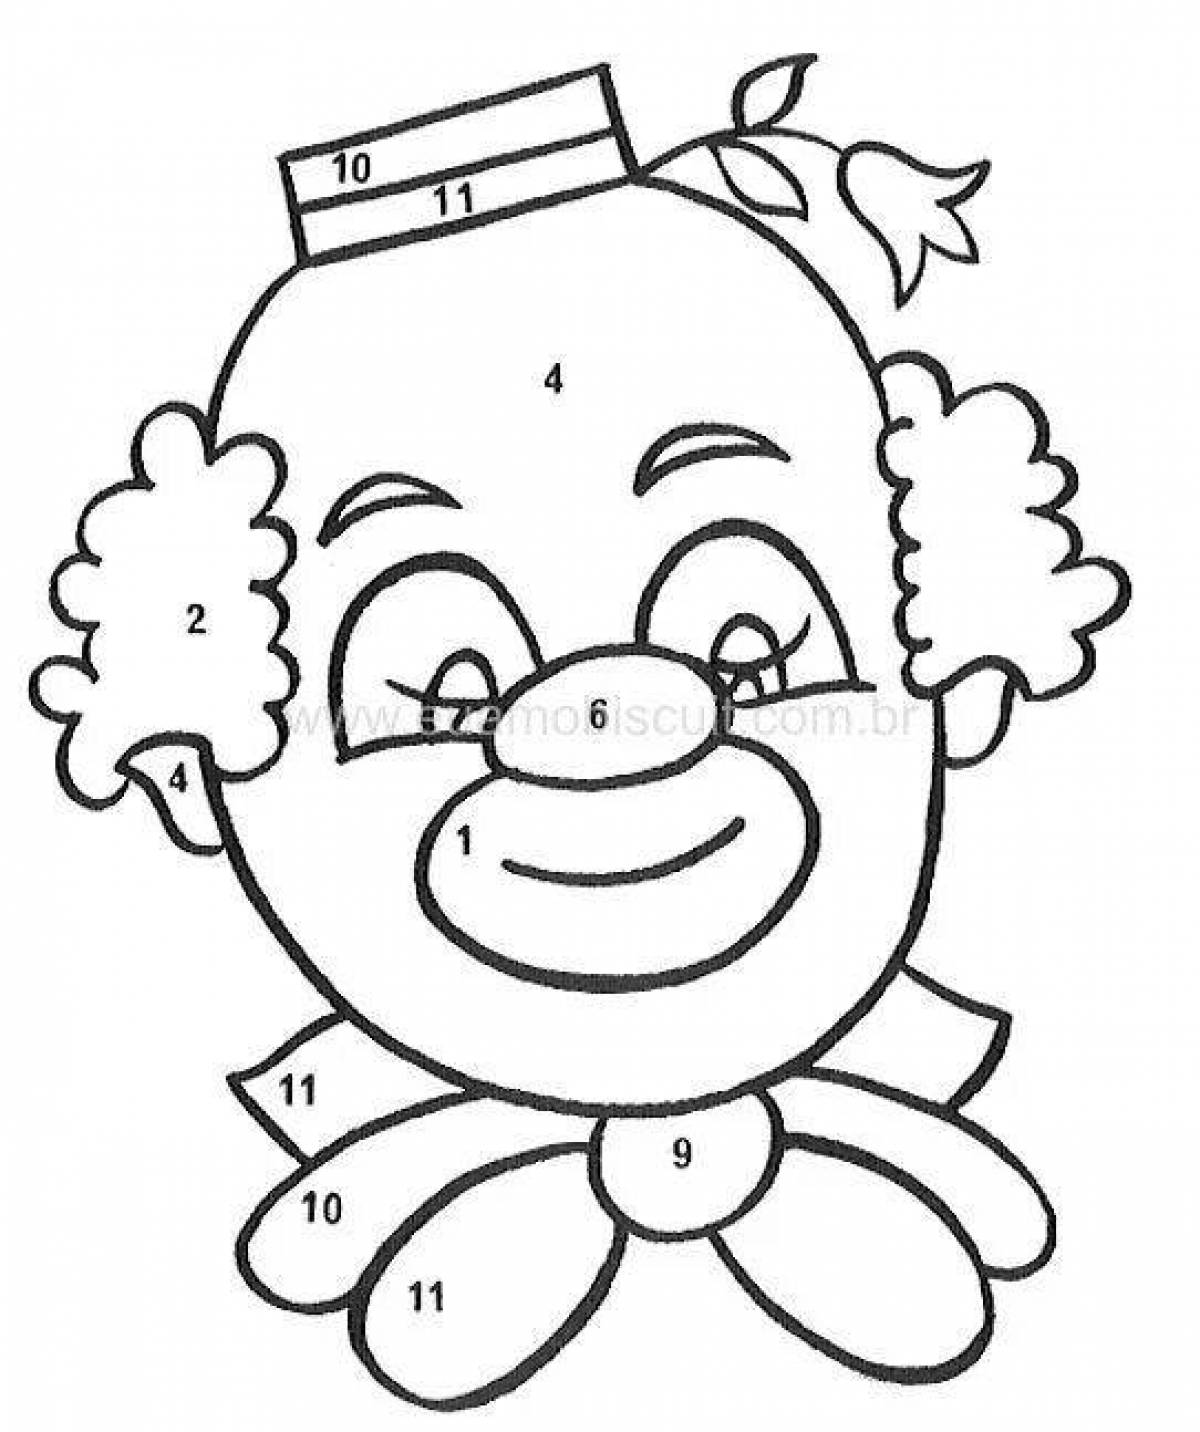 Zany clown face coloring page